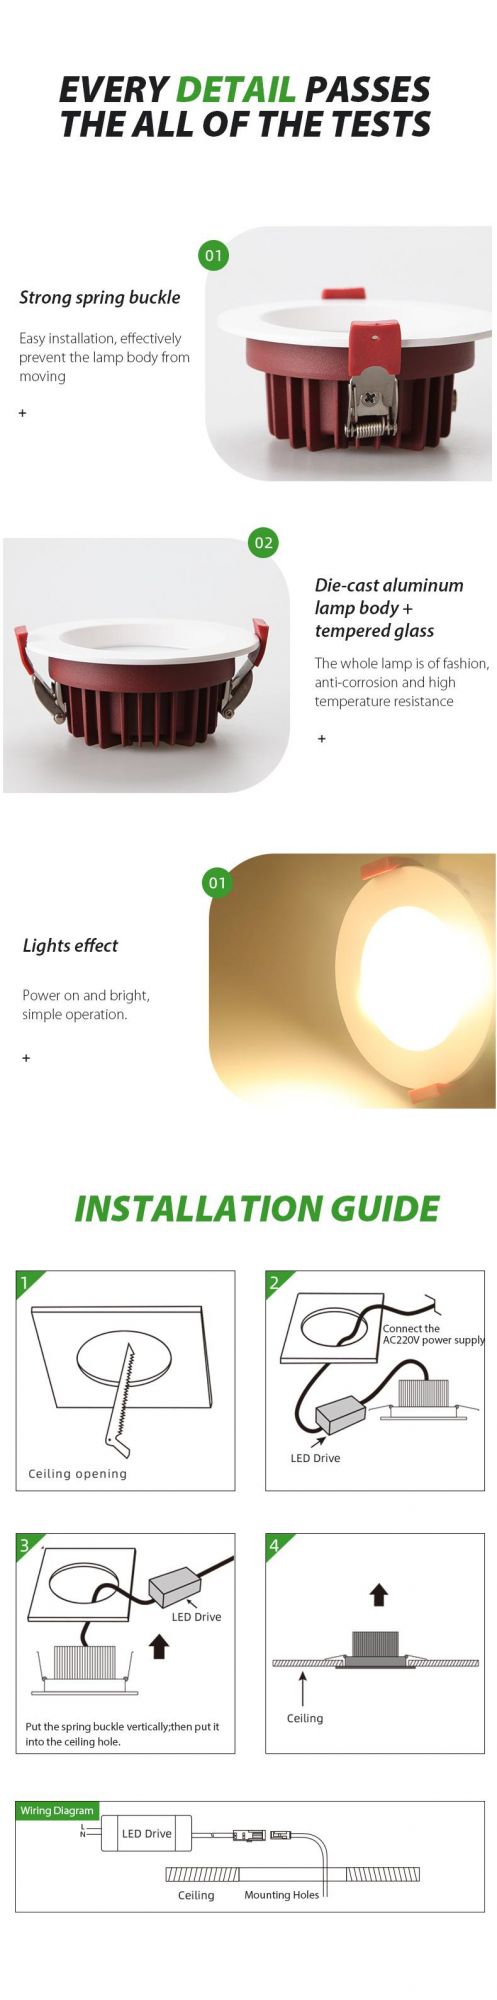 Free Sample Aluminum 10W COB Round Commercial LED Downlight with Driver (WF-LDL-MR-10W)